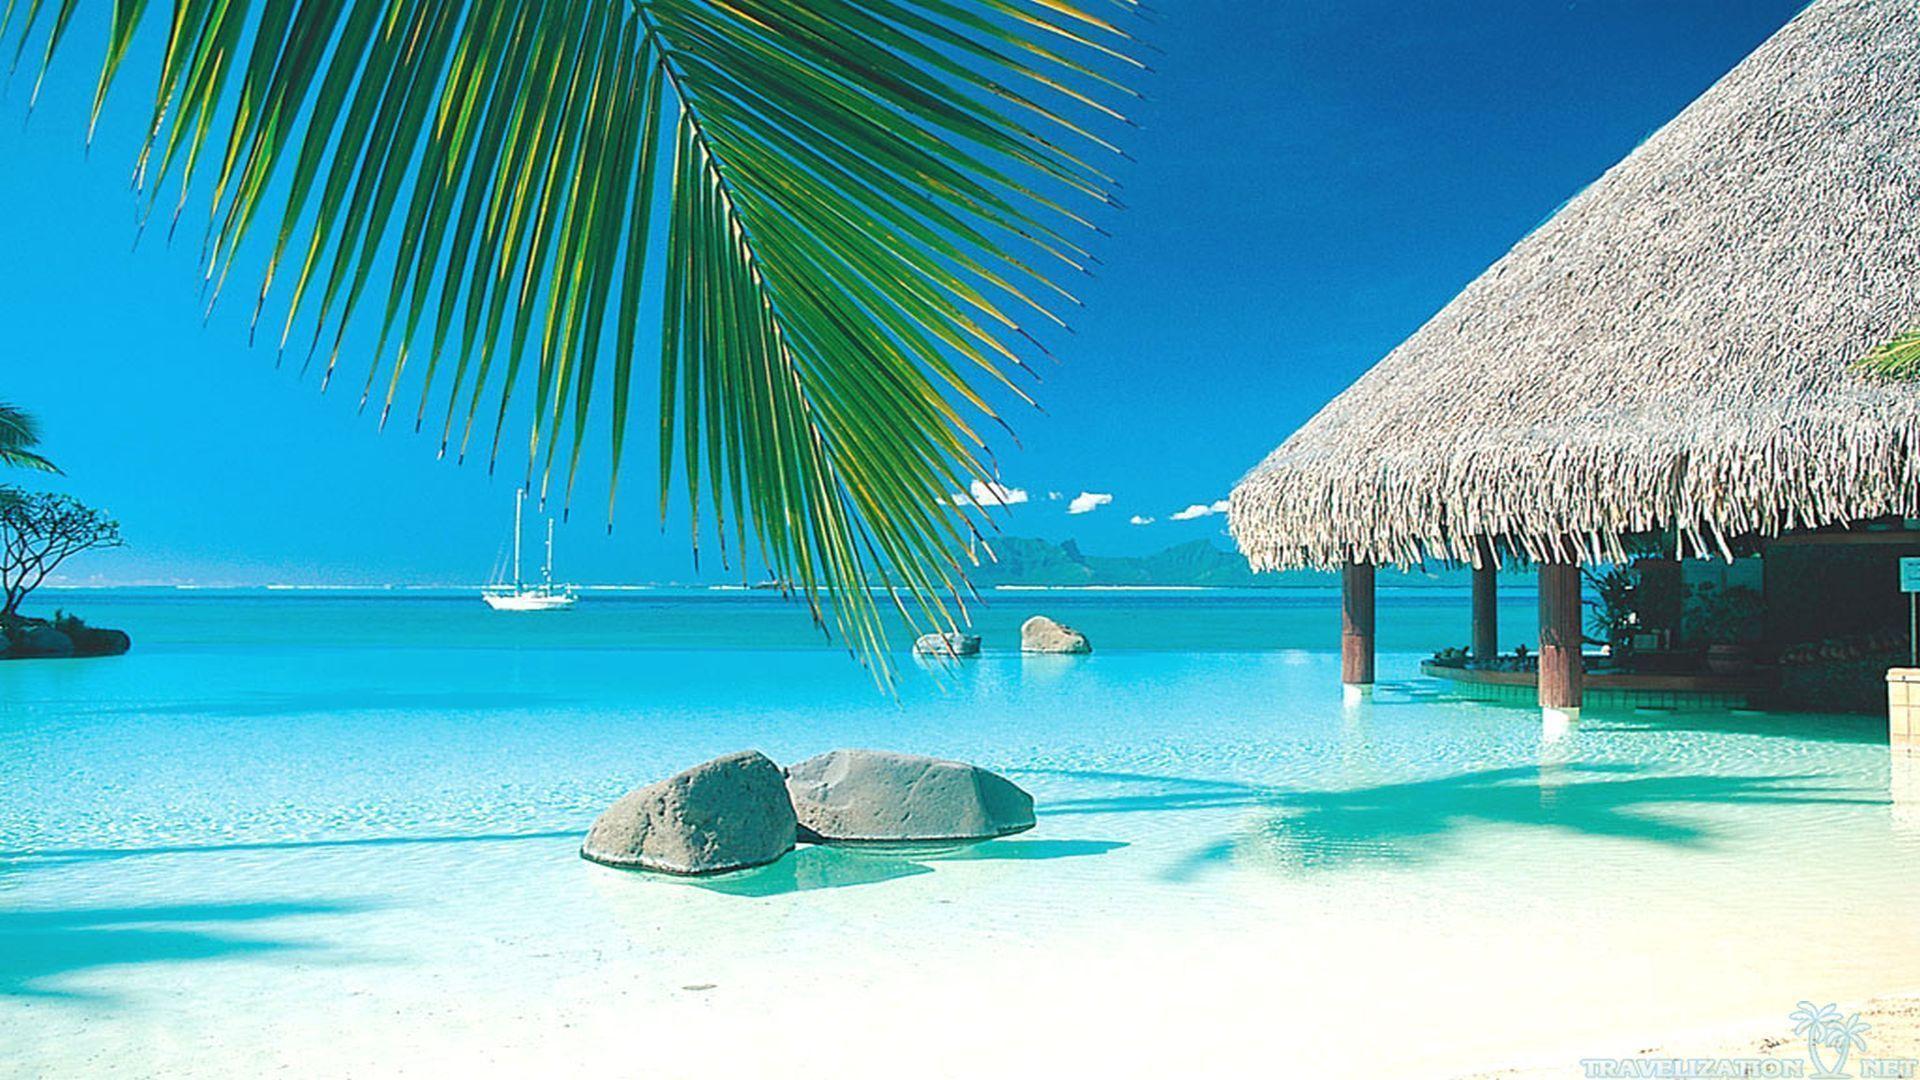 Paradise Beach Wallpapers - Wallpaper Cave